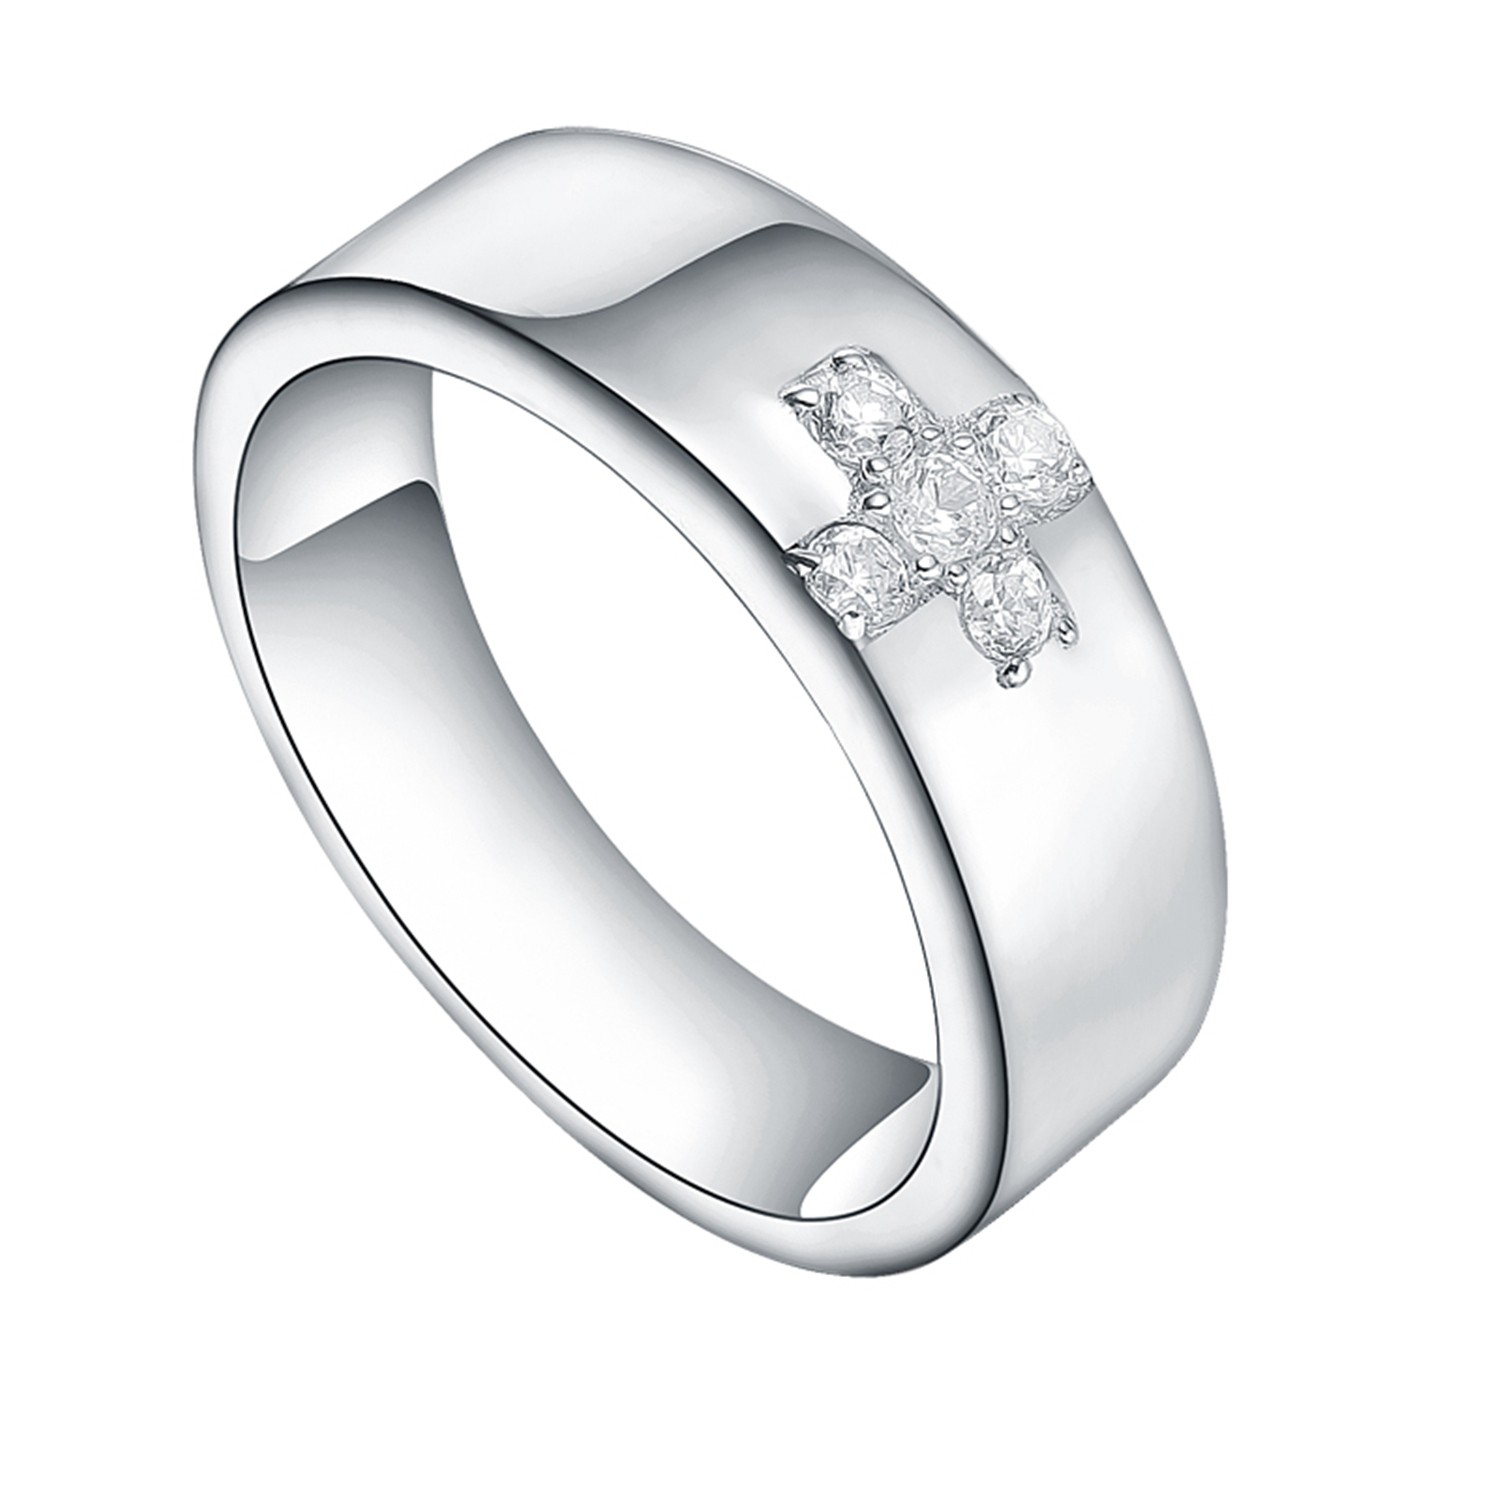 Silver cross zircon inlaid ring, classic and simple style